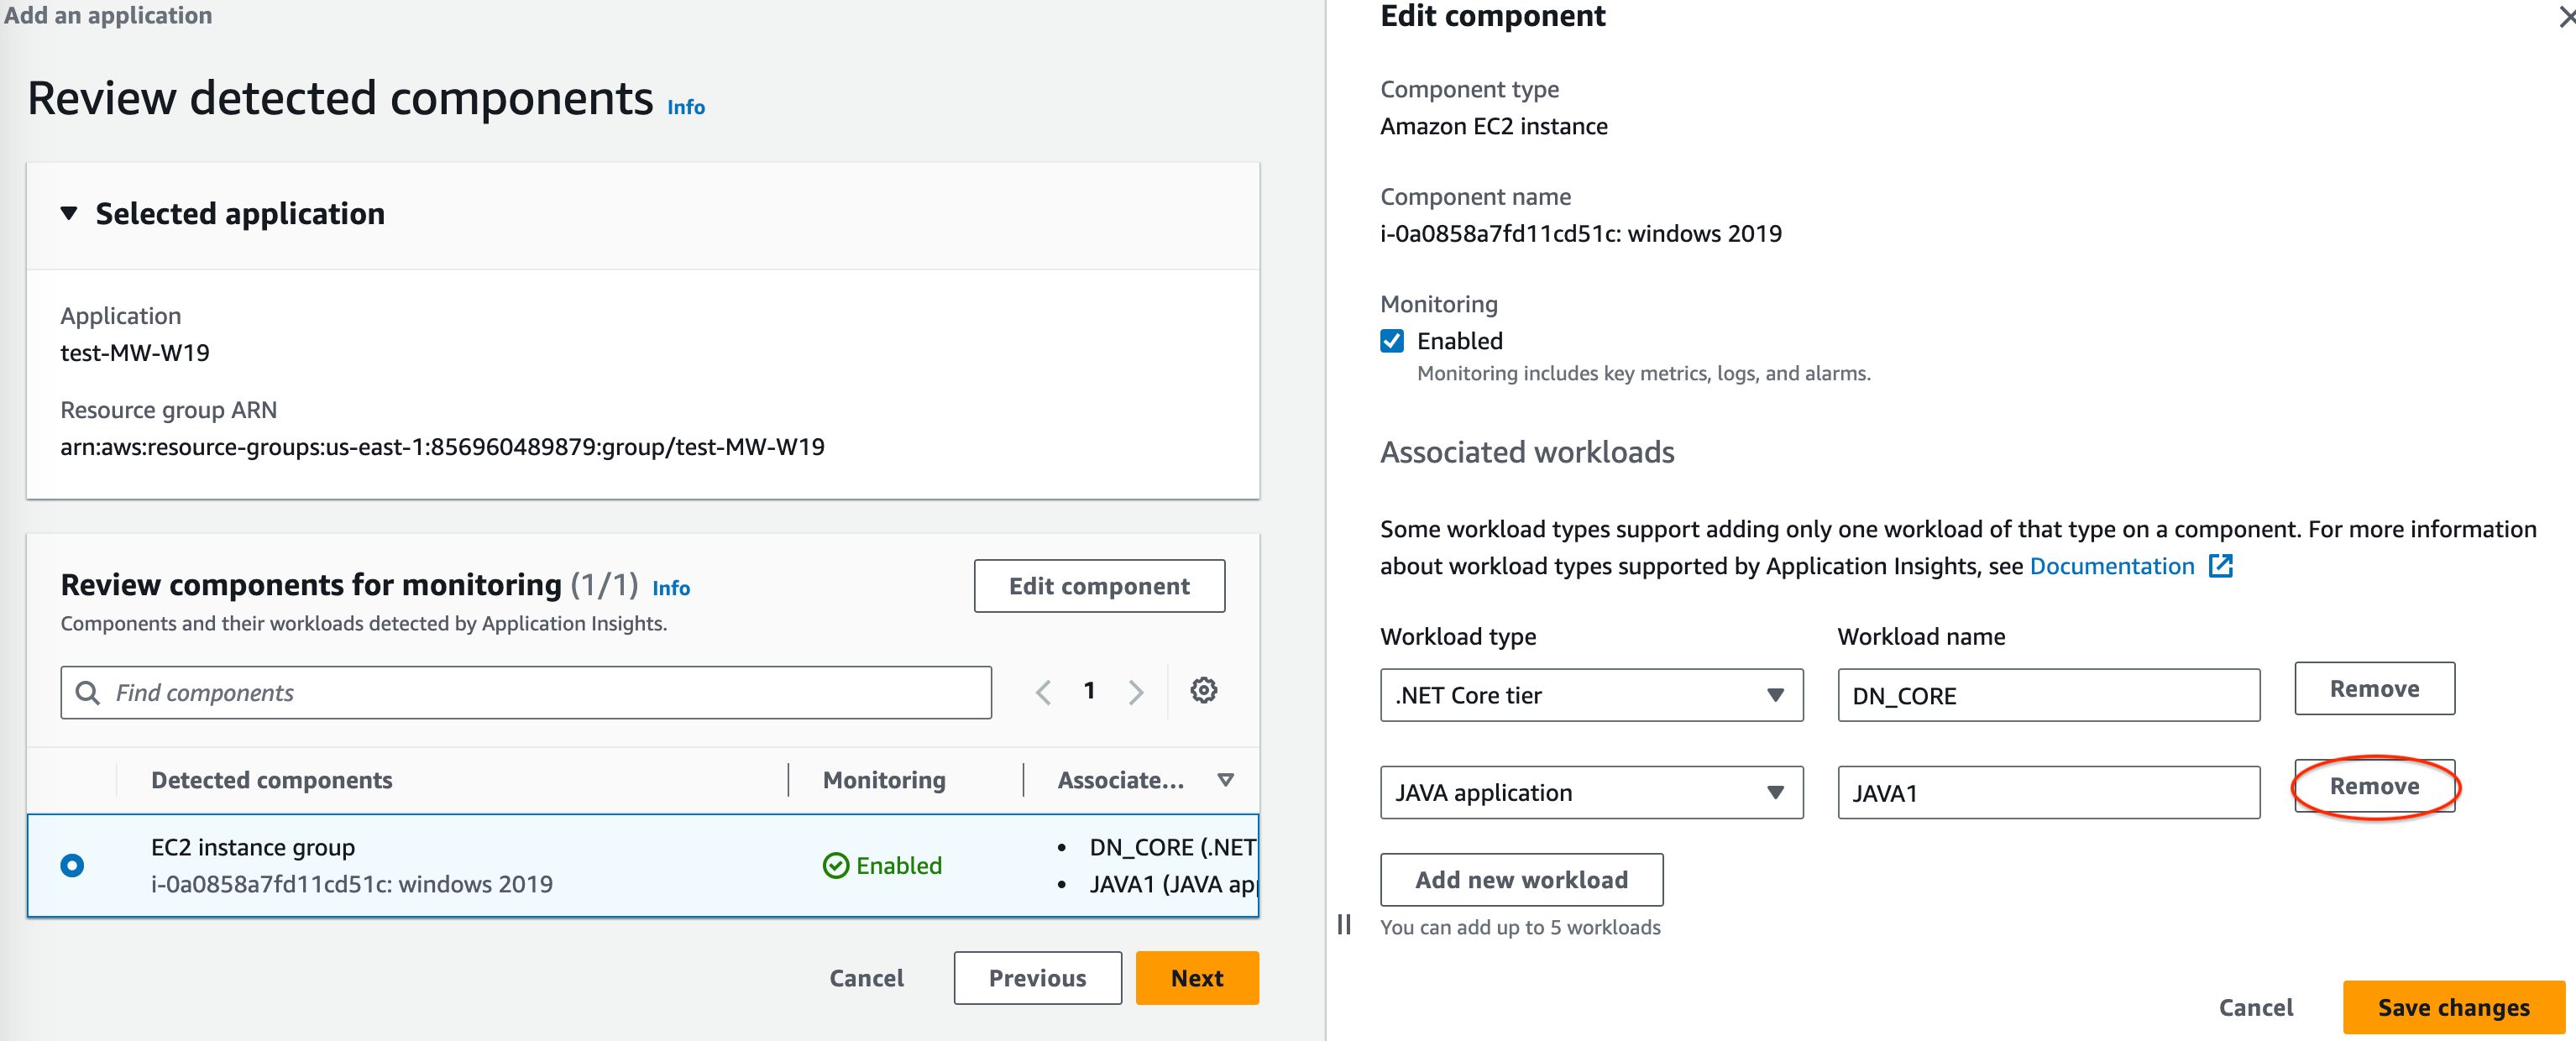 
                                                                 The edit component section of the CloudWatch Application Insights console: remove a workload.
                                                             